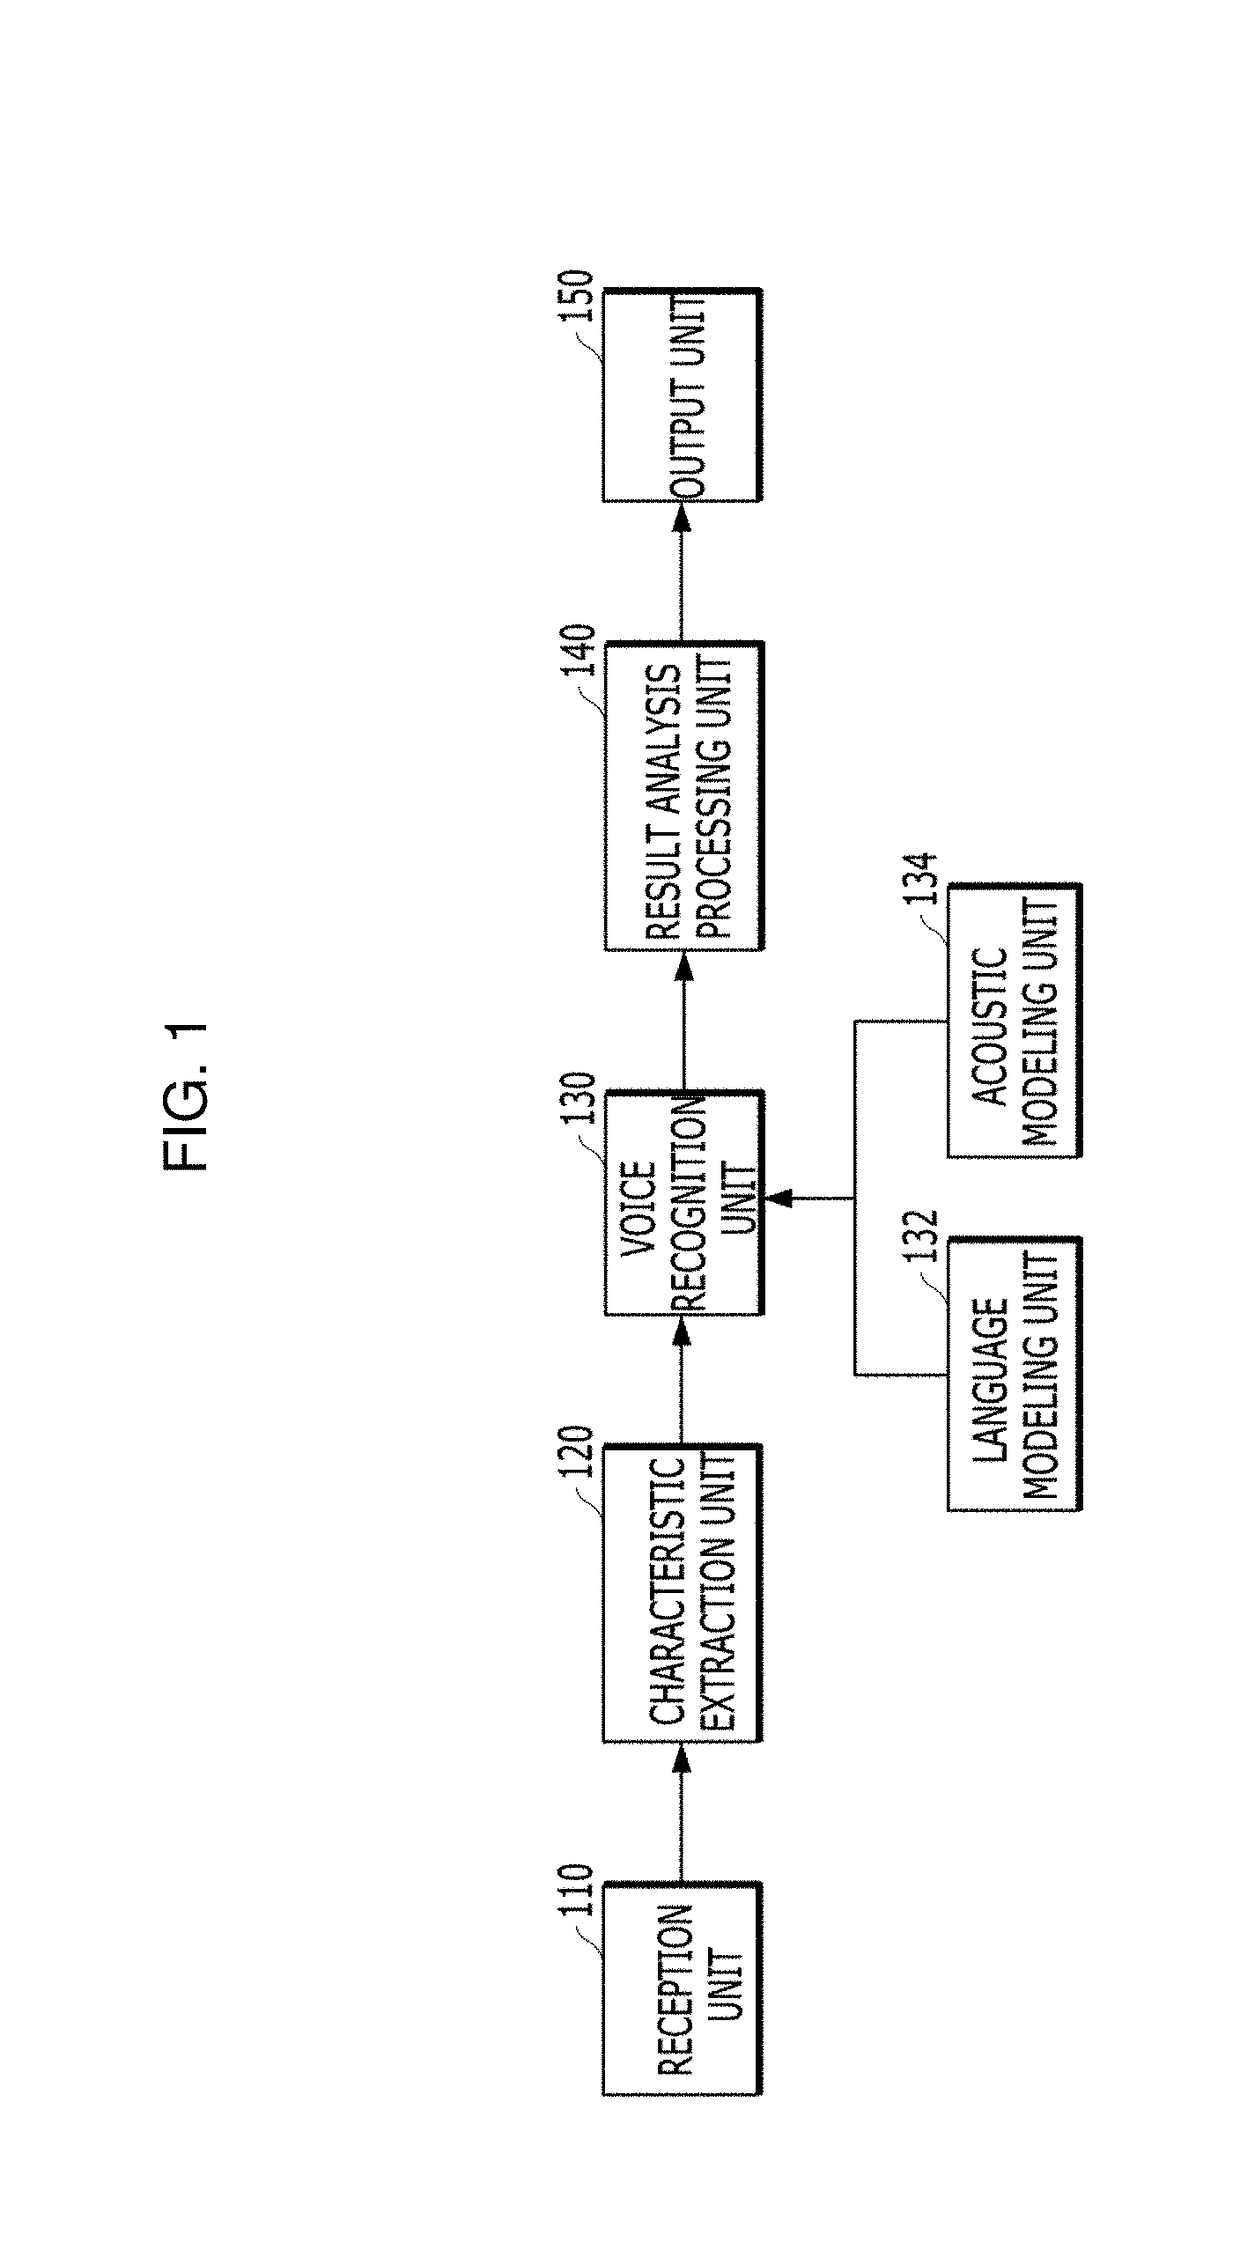 Method and apparatus for searching for geographic information using interactive voice recognition